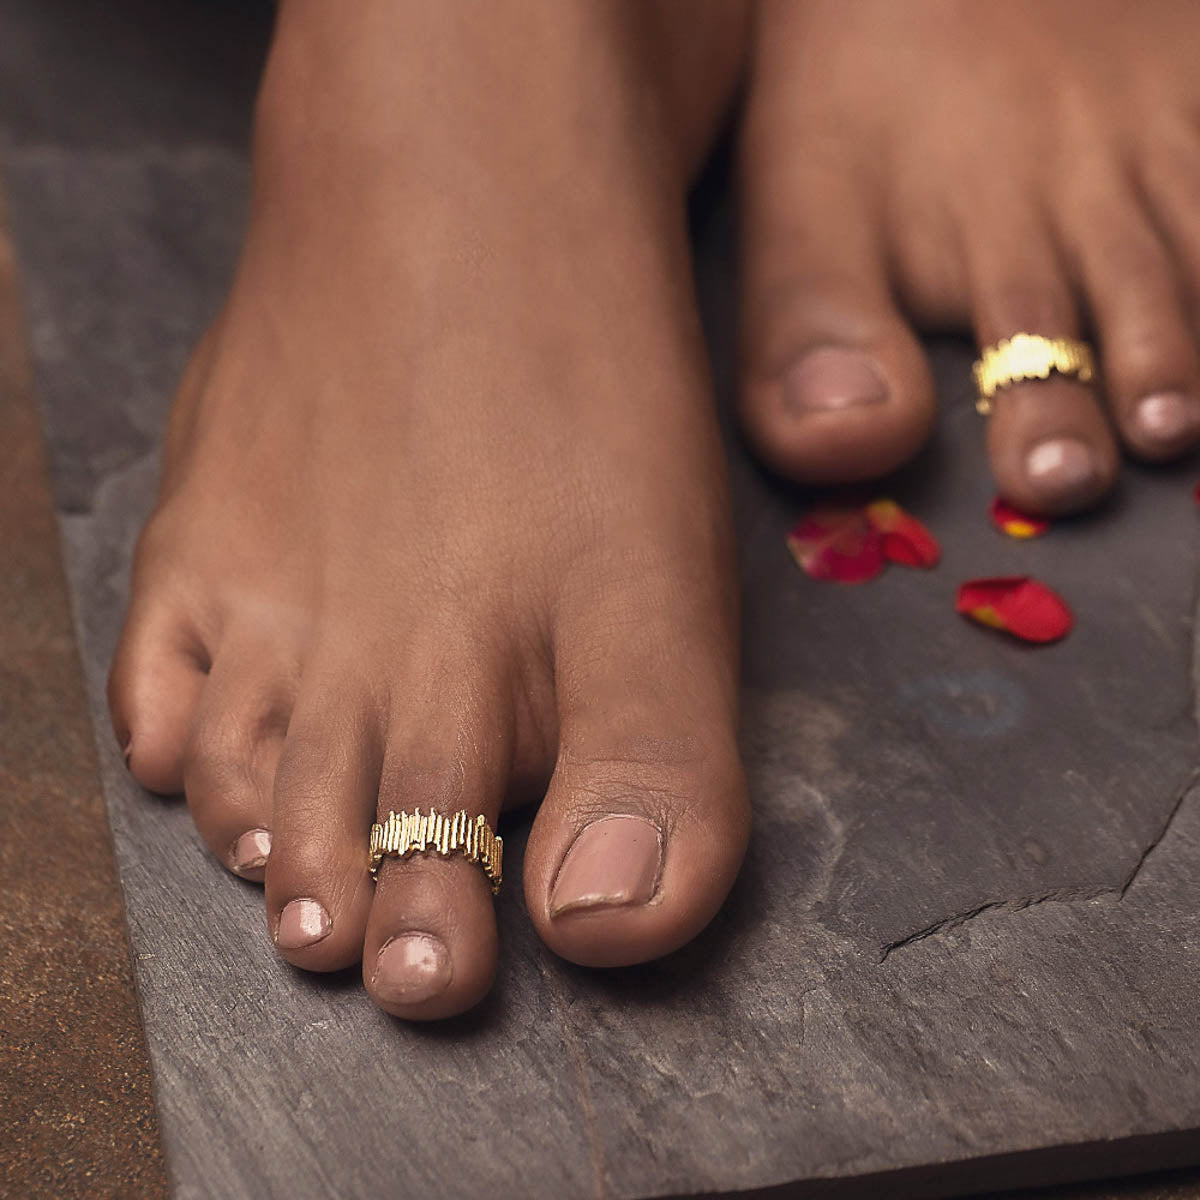 TALE OF THE WEARING OF THE TOE RING – Wolfmaan